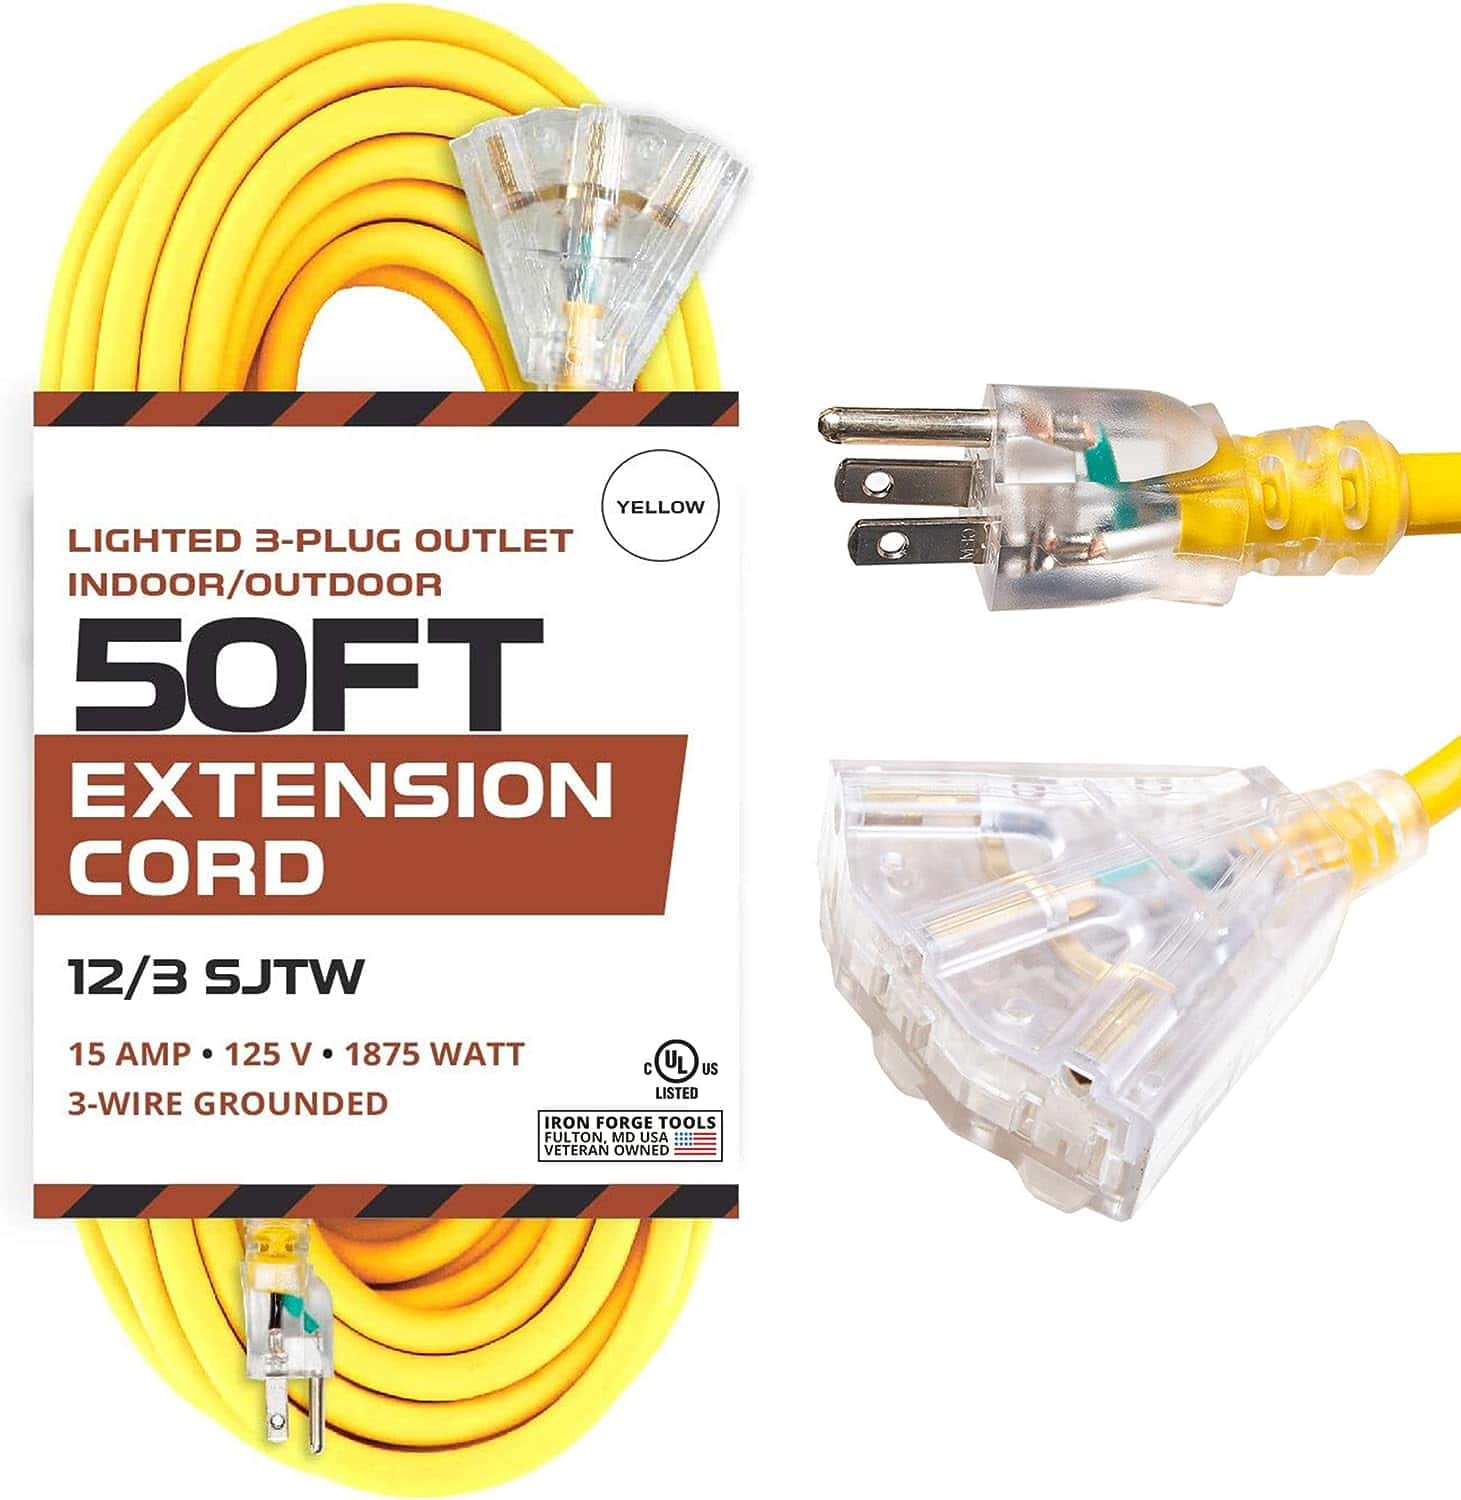 Iron-Forge-Cable-50-Foot-Lighted-Outdoor-Extension-Cord-with-3-Electrical-Power-Outlets-12-3-SJTW-Heavy-Duty-Yellow-Extension-Cable-with-3-Prong-Grounded-Plug-for-Safety-15-AMP